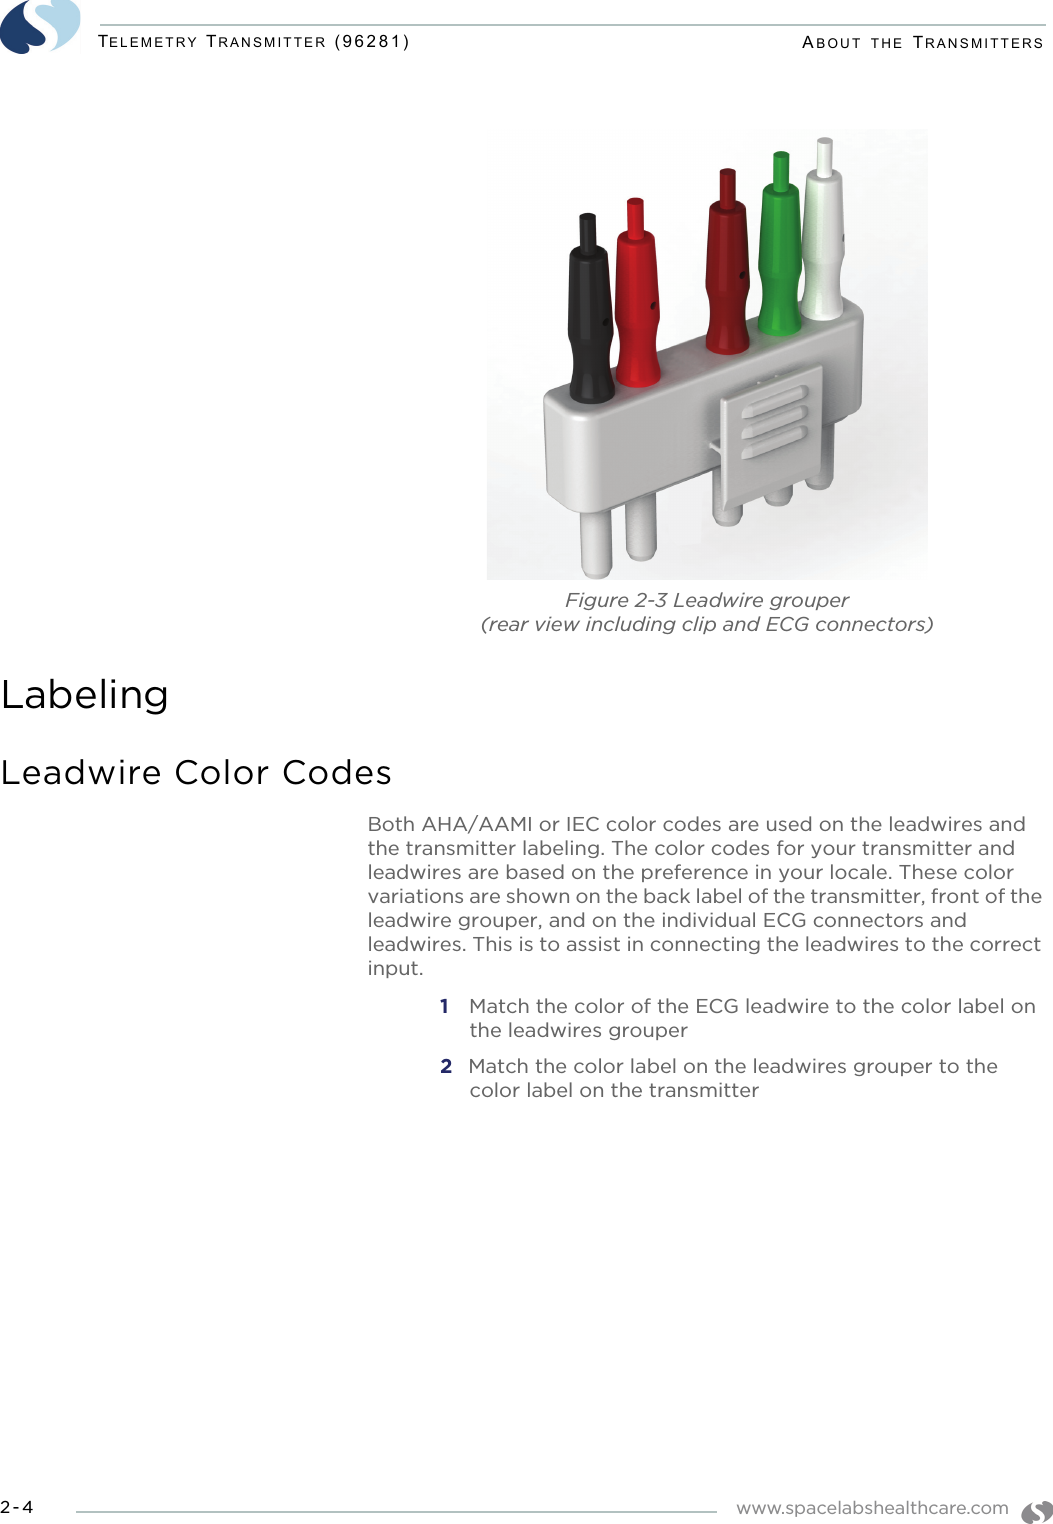 www.spacelabshealthcare.com2-4TELEMETRY TRANSMITTER (96281) ABOUT THE TRANSMITTERSFigure 2-3 Leadwire grouper (rear view including clip and ECG connectors)LabelingLeadwire Color CodesBoth AHA/AAMI or IEC color codes are used on the leadwires and the transmitter labeling. The color codes for your transmitter and leadwires are based on the preference in your locale. These color variations are shown on the back label of the transmitter, front of the leadwire grouper, and on the individual ECG connectors and leadwires. This is to assist in connecting the leadwires to the correct input.1  Match the color of the ECG leadwire to the color label on the leadwires grouper2 Match the color label on the leadwires grouper to the color label on the transmitter